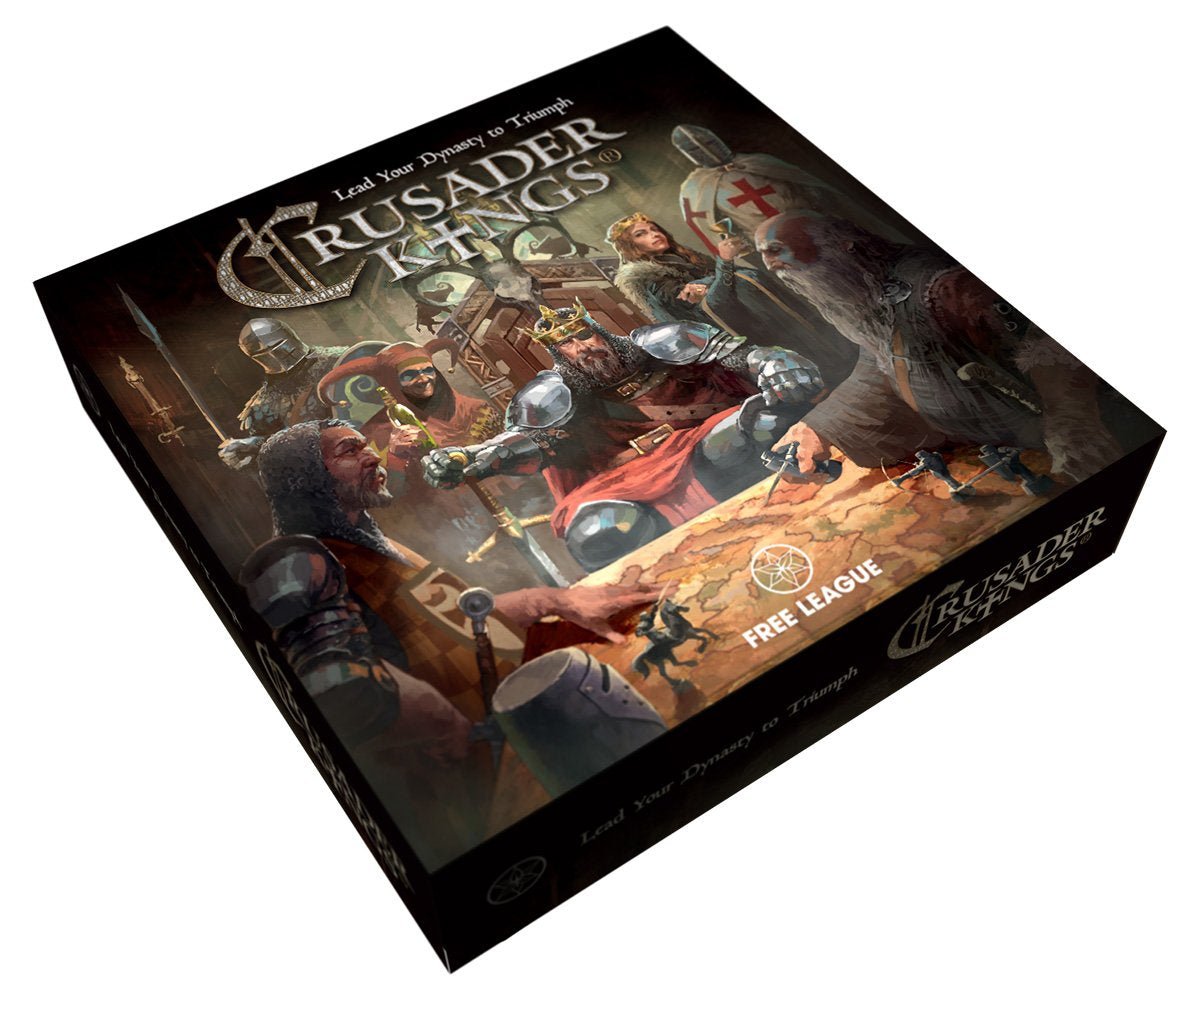 Crusader Kings: the Board Game - 3D box cover illustration